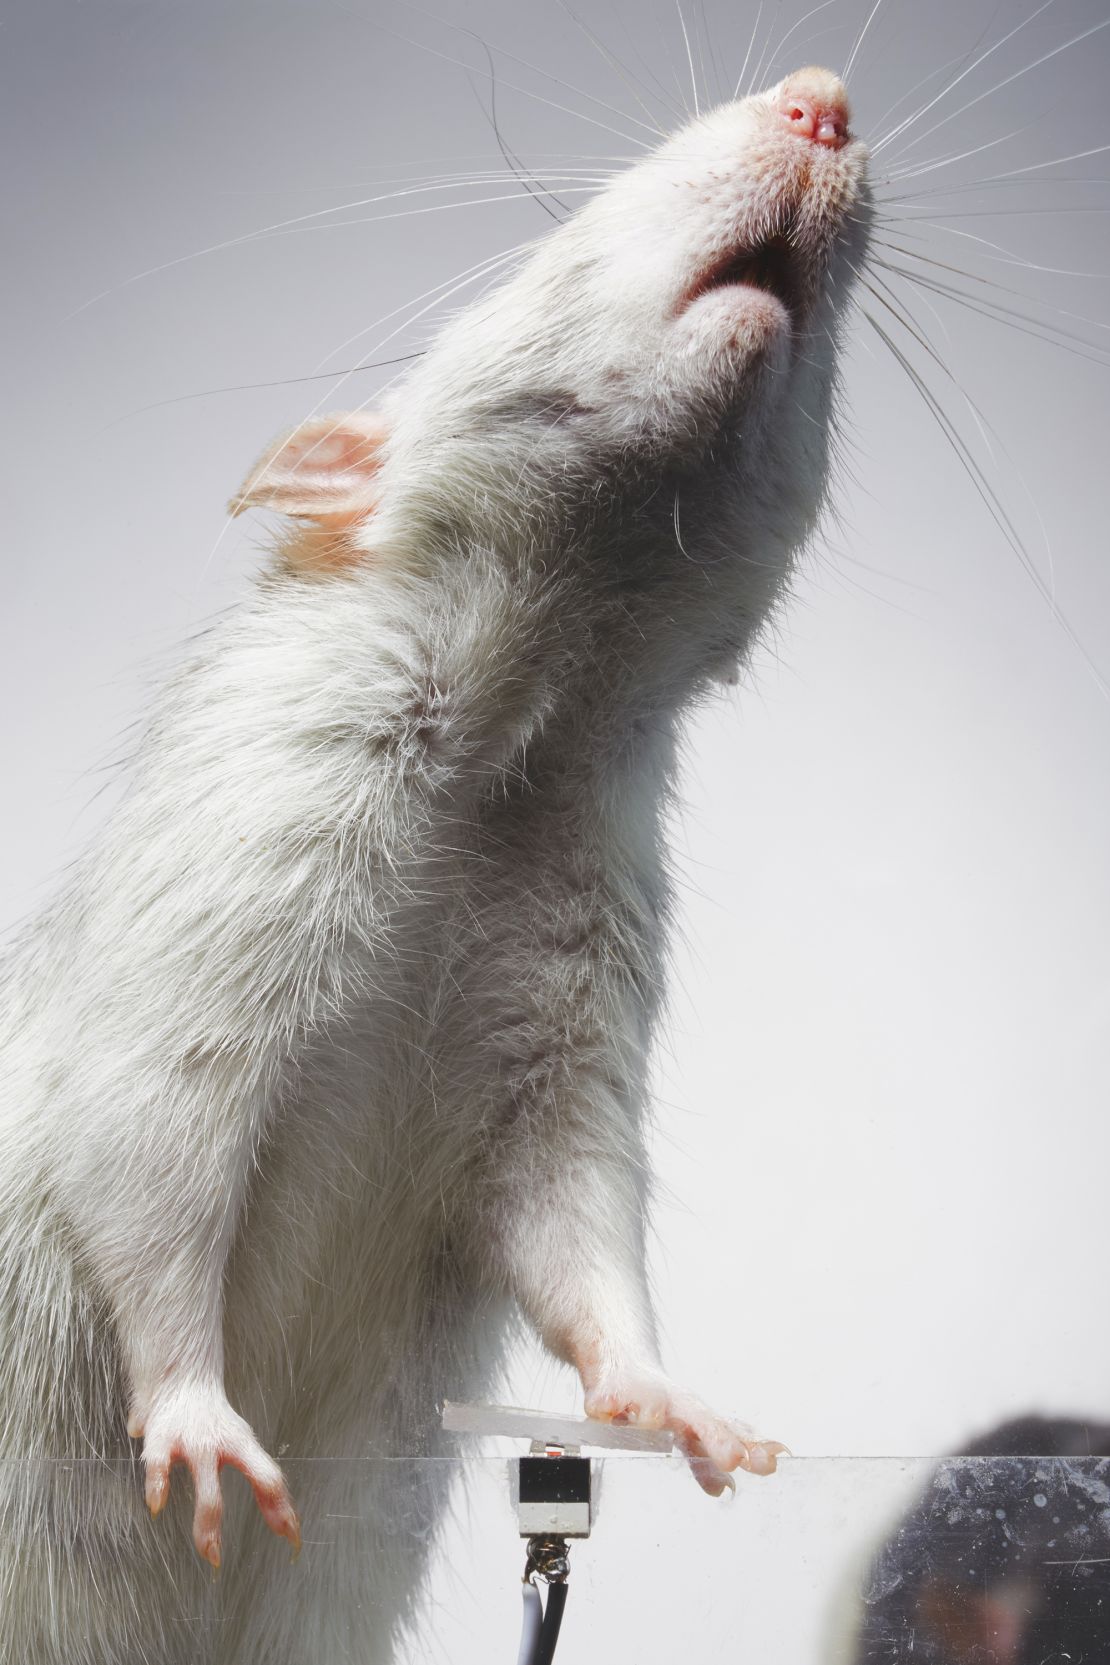 The rats were trained to press a button that triggered a camera attached to their cage.